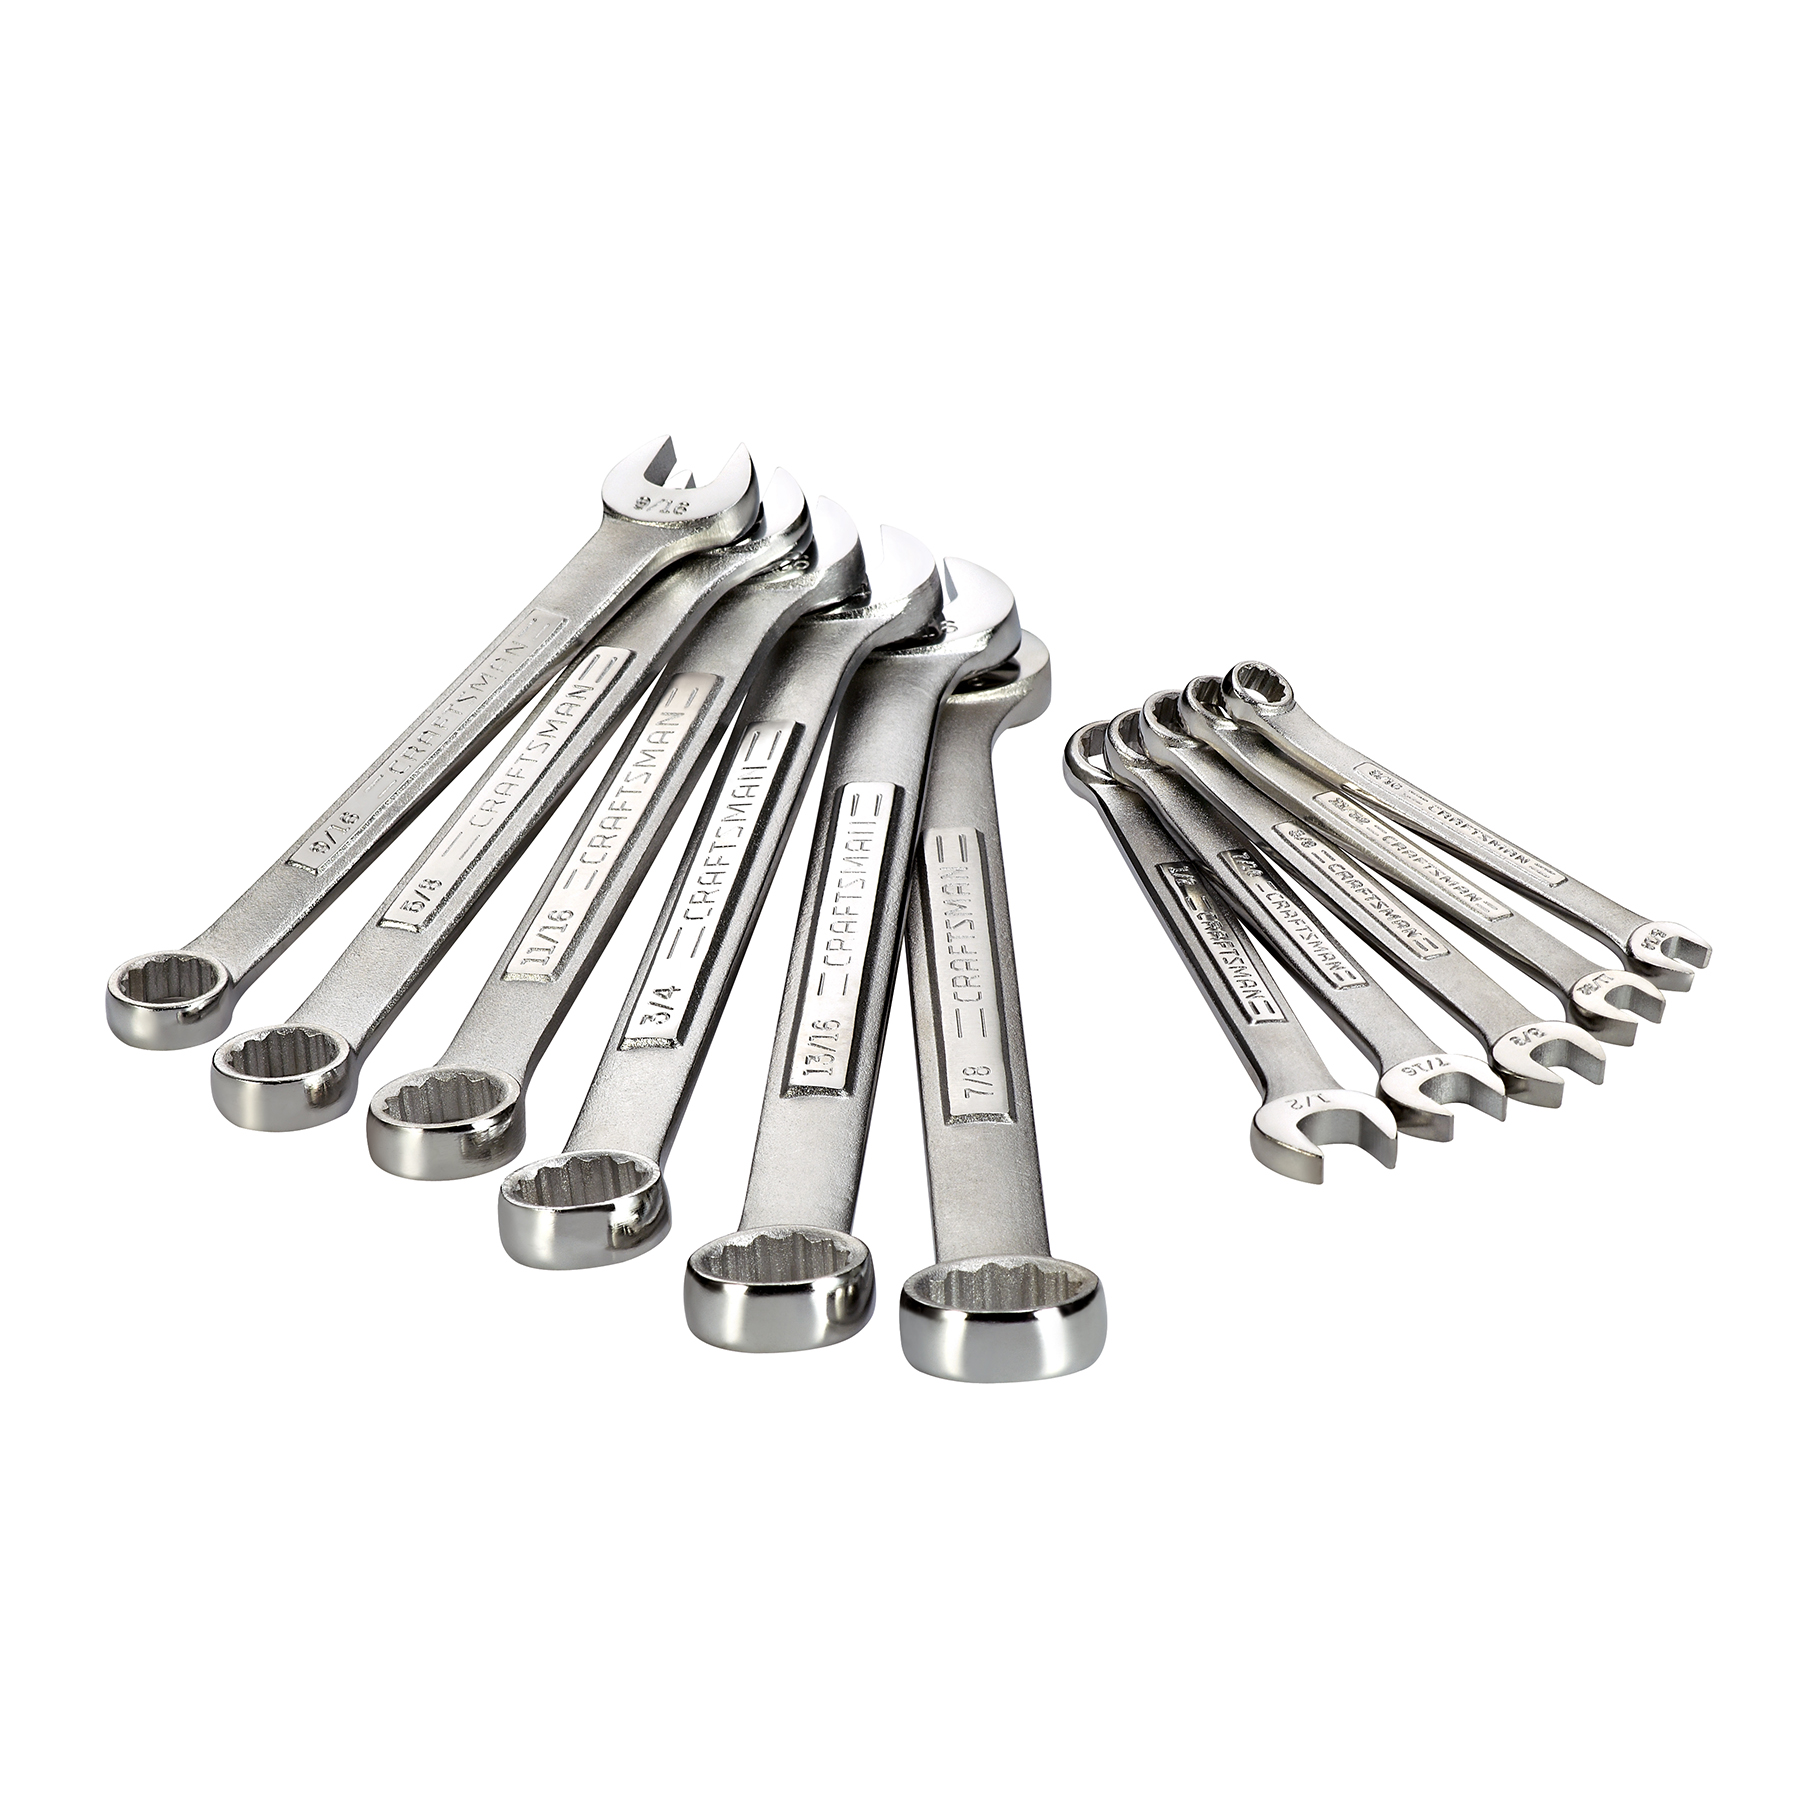 Craftsman 11 pc. Inch Combination Wrench Set